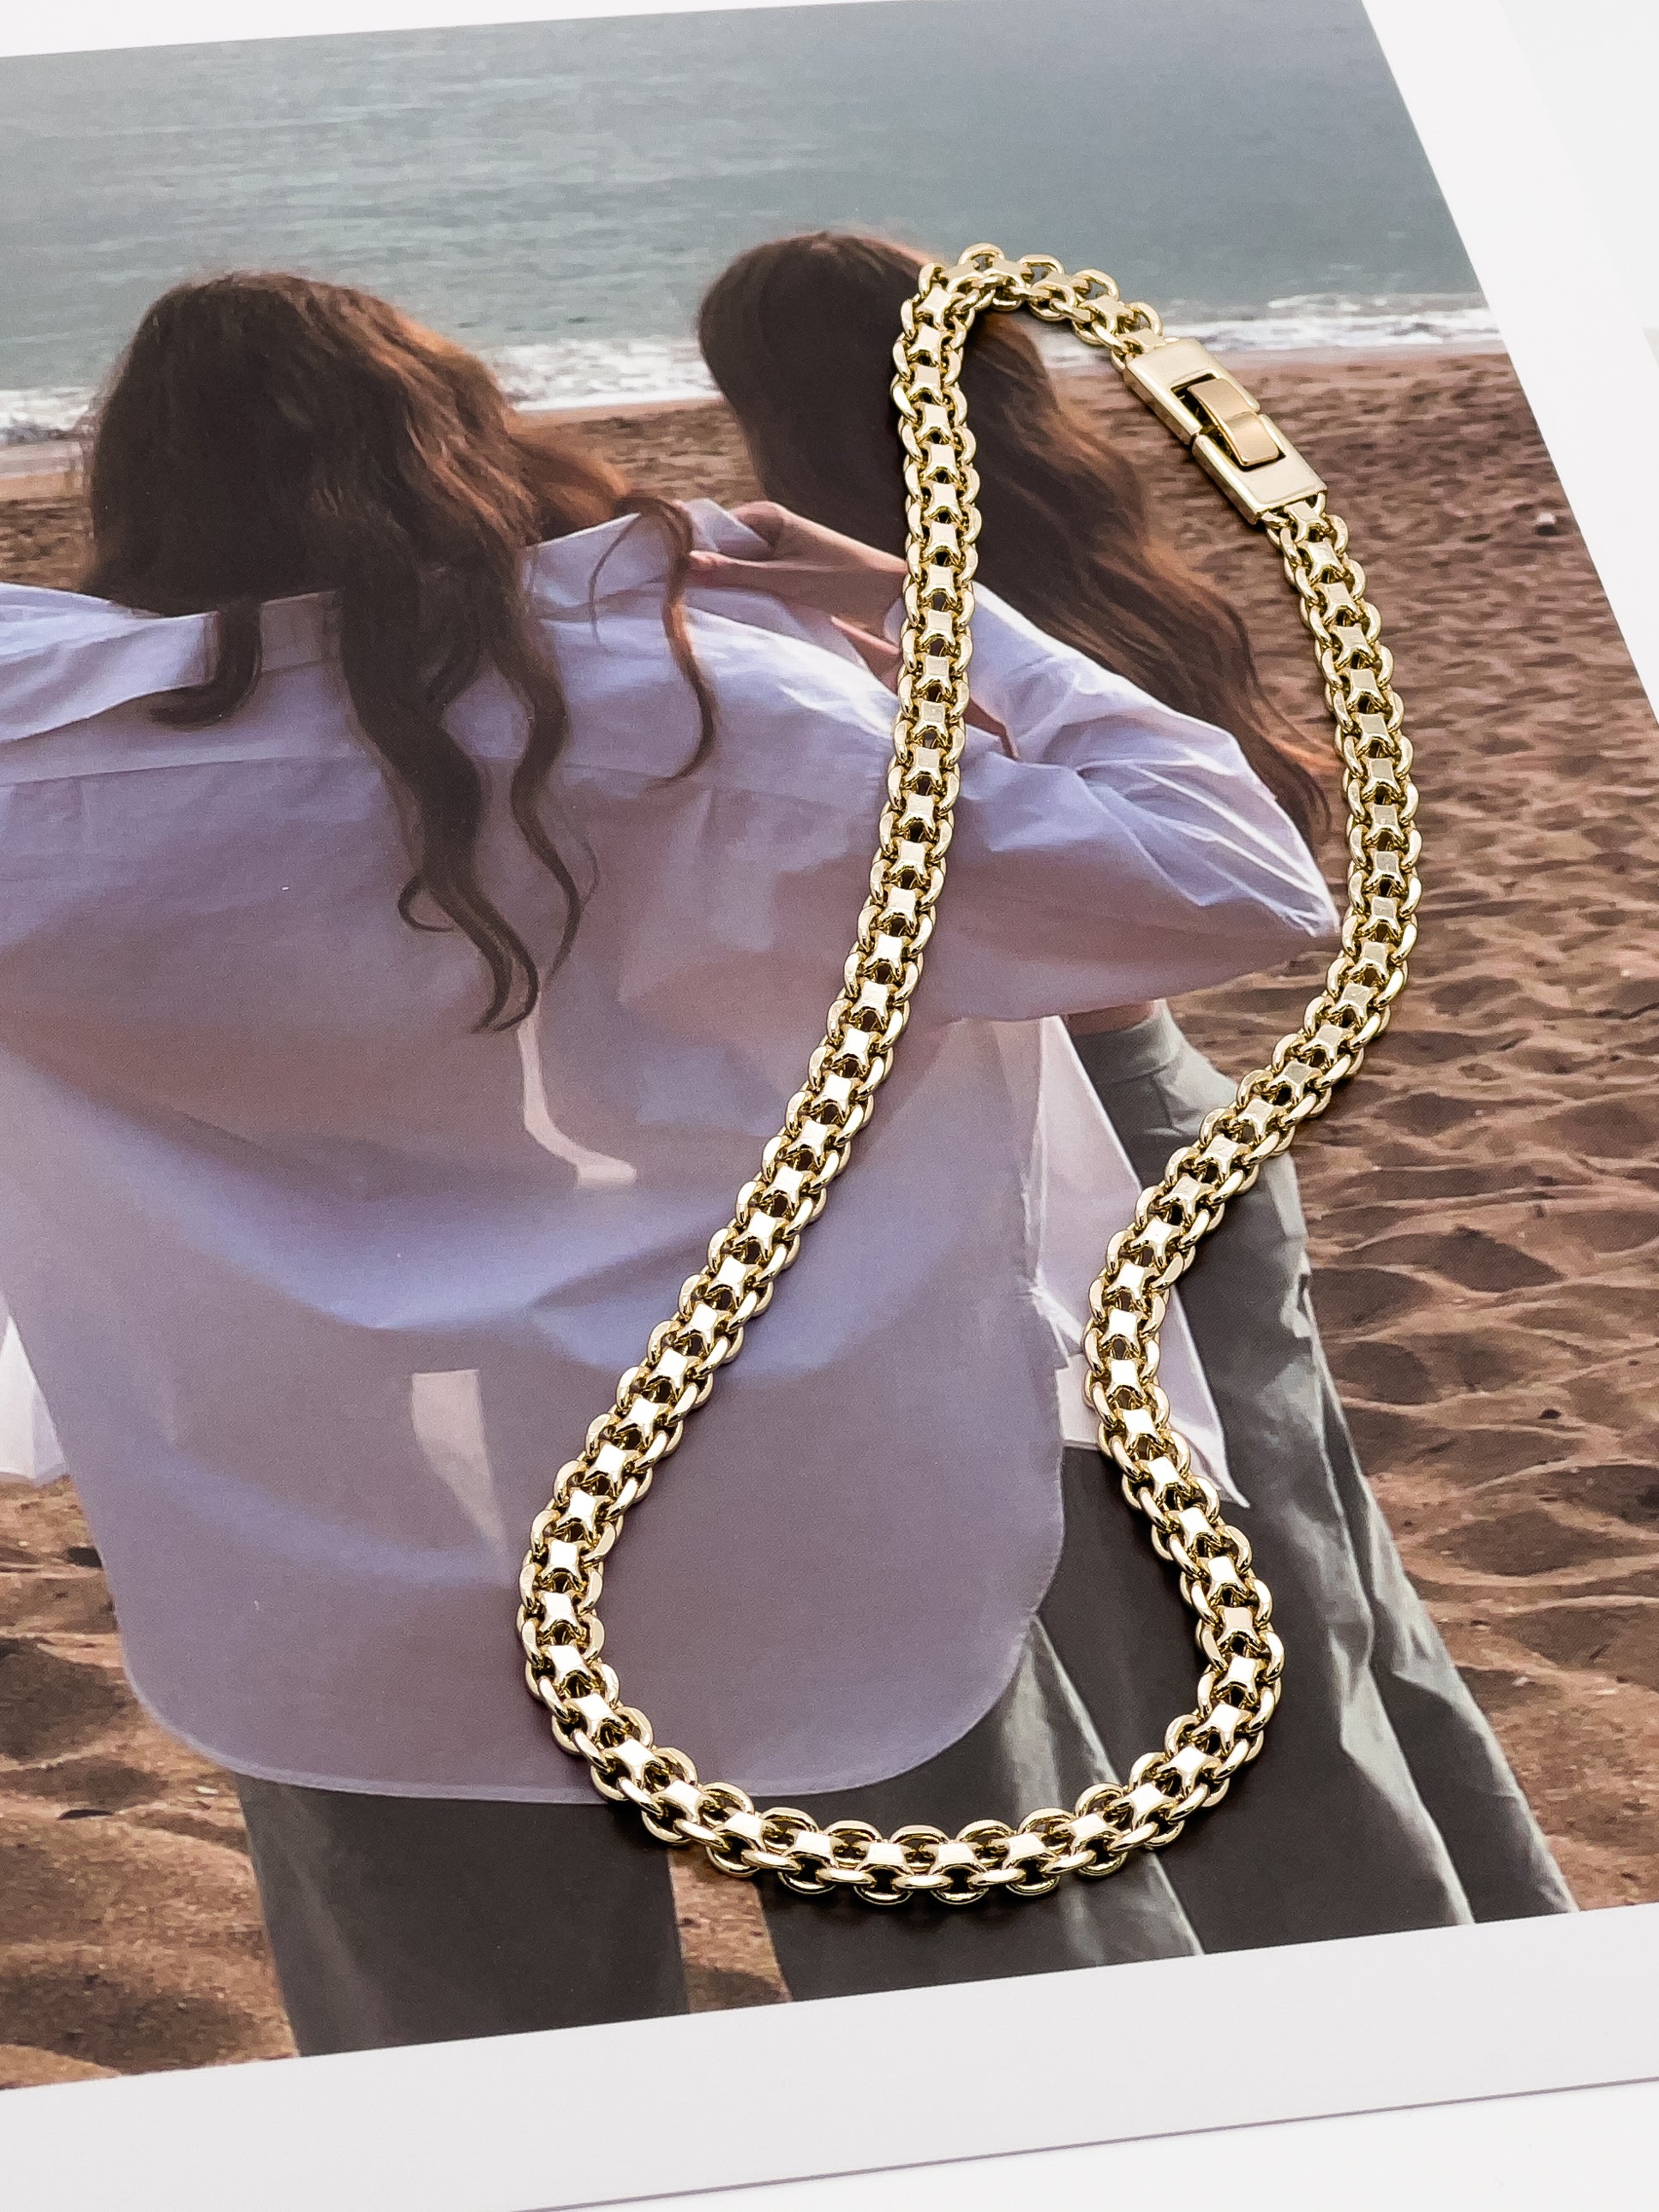 Parker Light Gold Chain Necklace - Fashion Jewelry | Chic Chic Bon